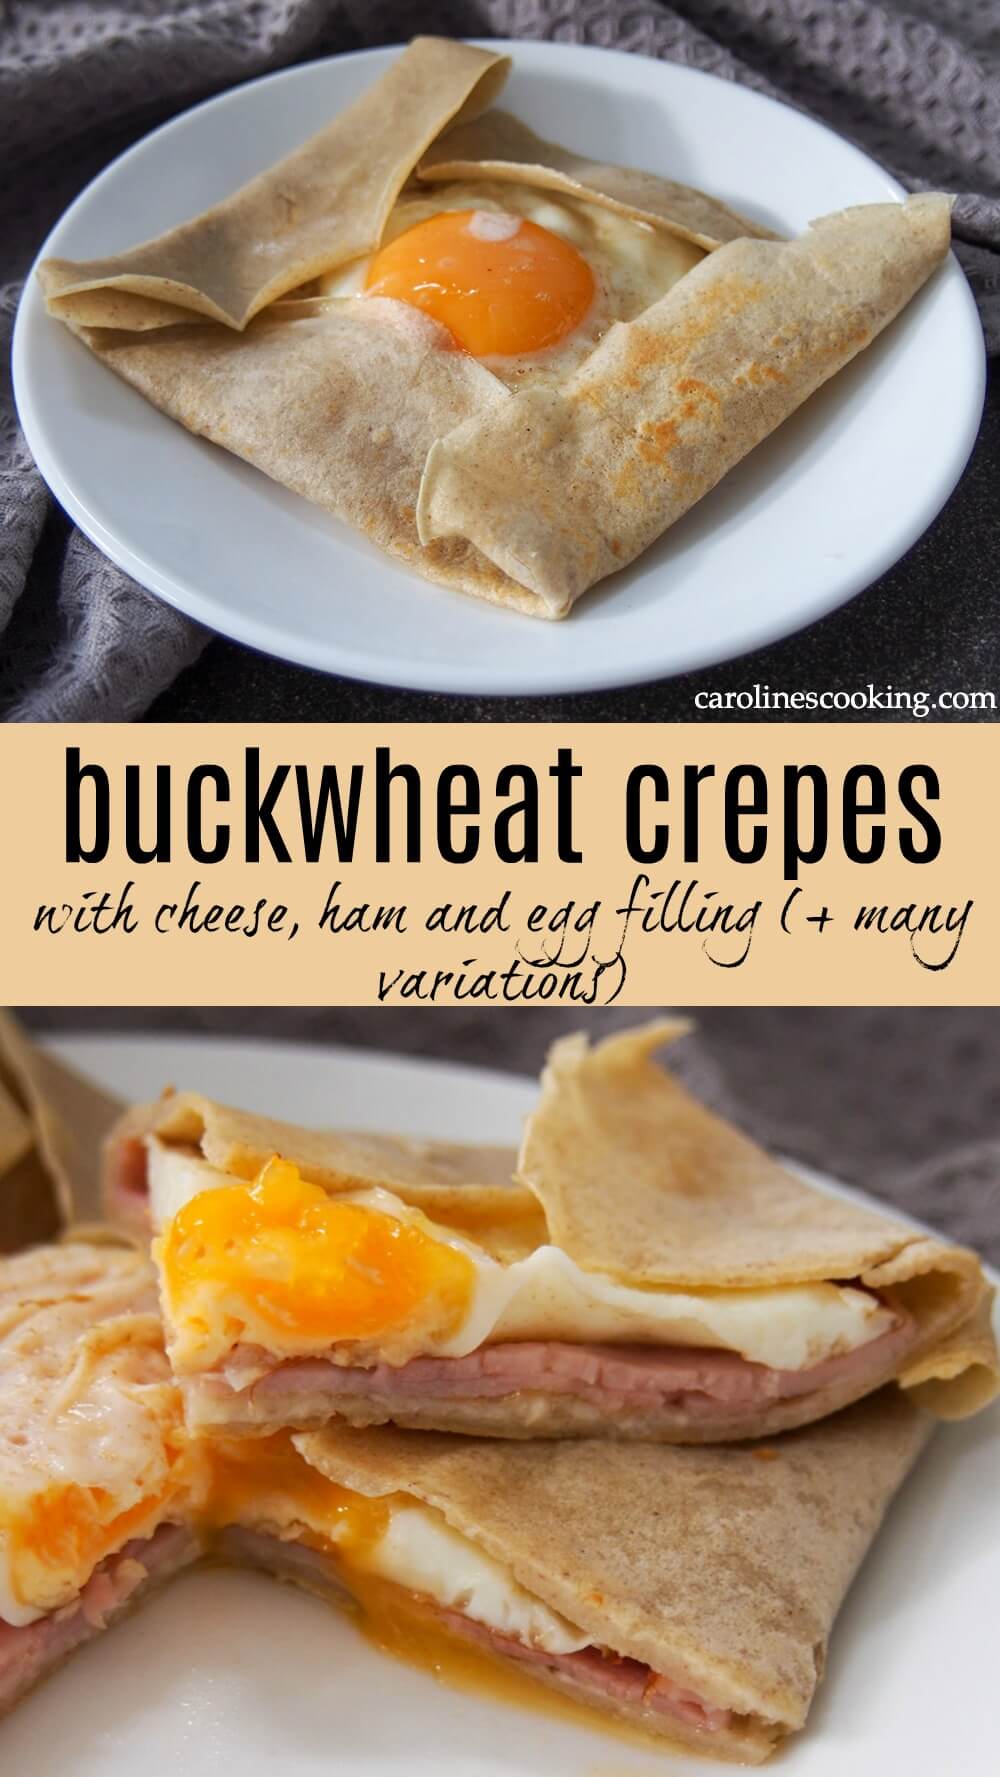 These French buckwheat crepes are easy to make, naturally gluten free and with a lovely slightly nutty flavor.  They're perfect loaded up with cheese, ham and egg for a classic "full pancake" for brunch/ lunch, or with many other tasty fillings.  #crepes #buckwheat #glutenfree #frenchfood